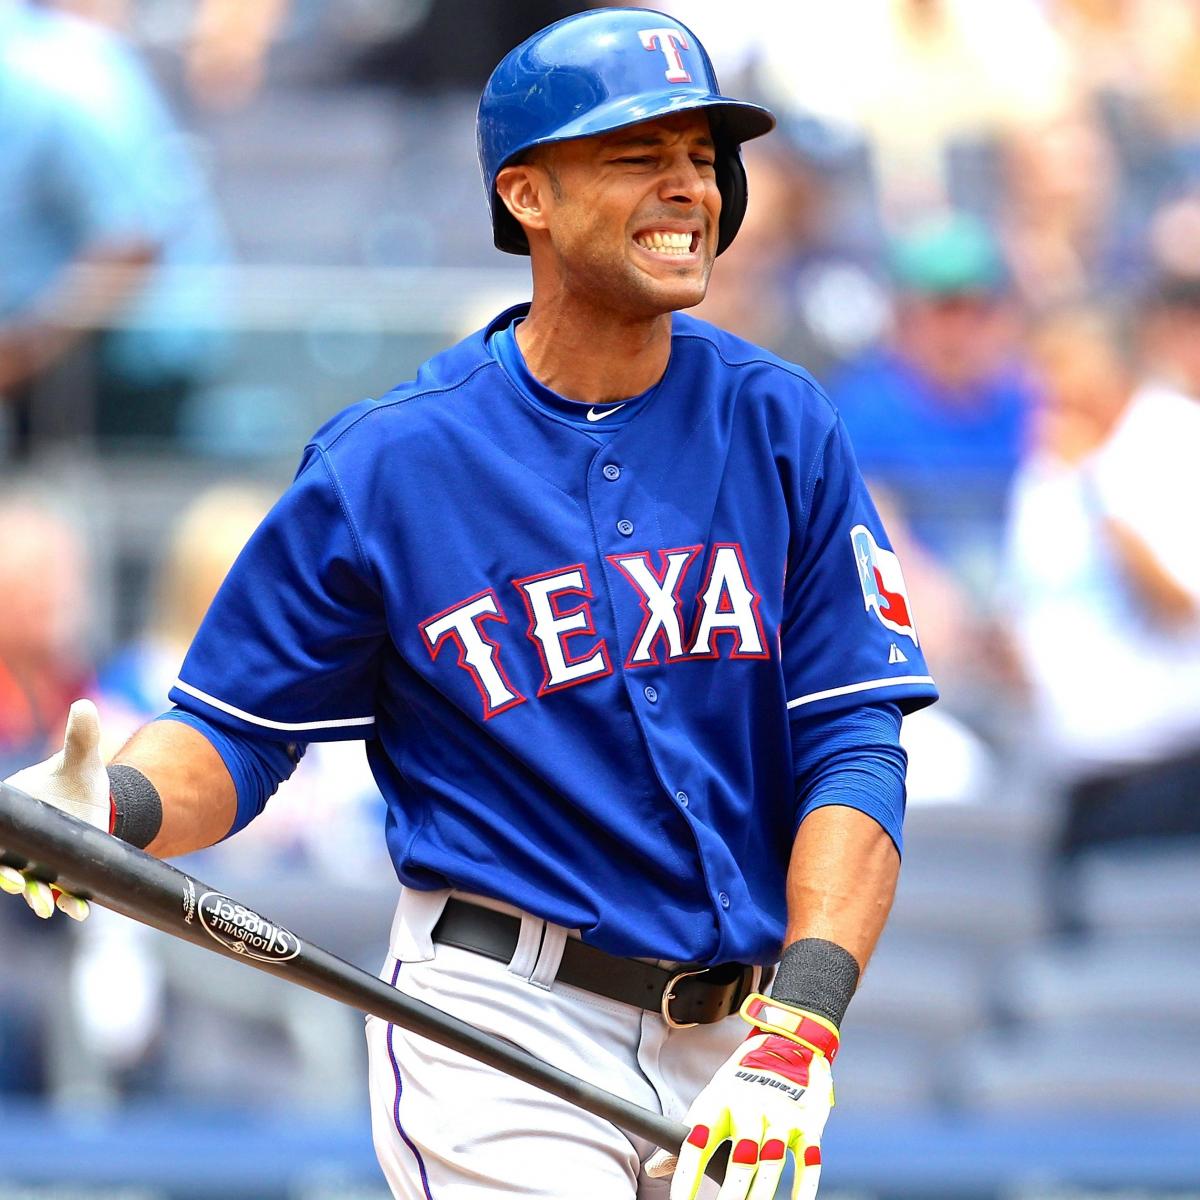 Alex Rios Rumors: Latest News and Speculation Surrounding Free-Agent OF | Bleacher ...